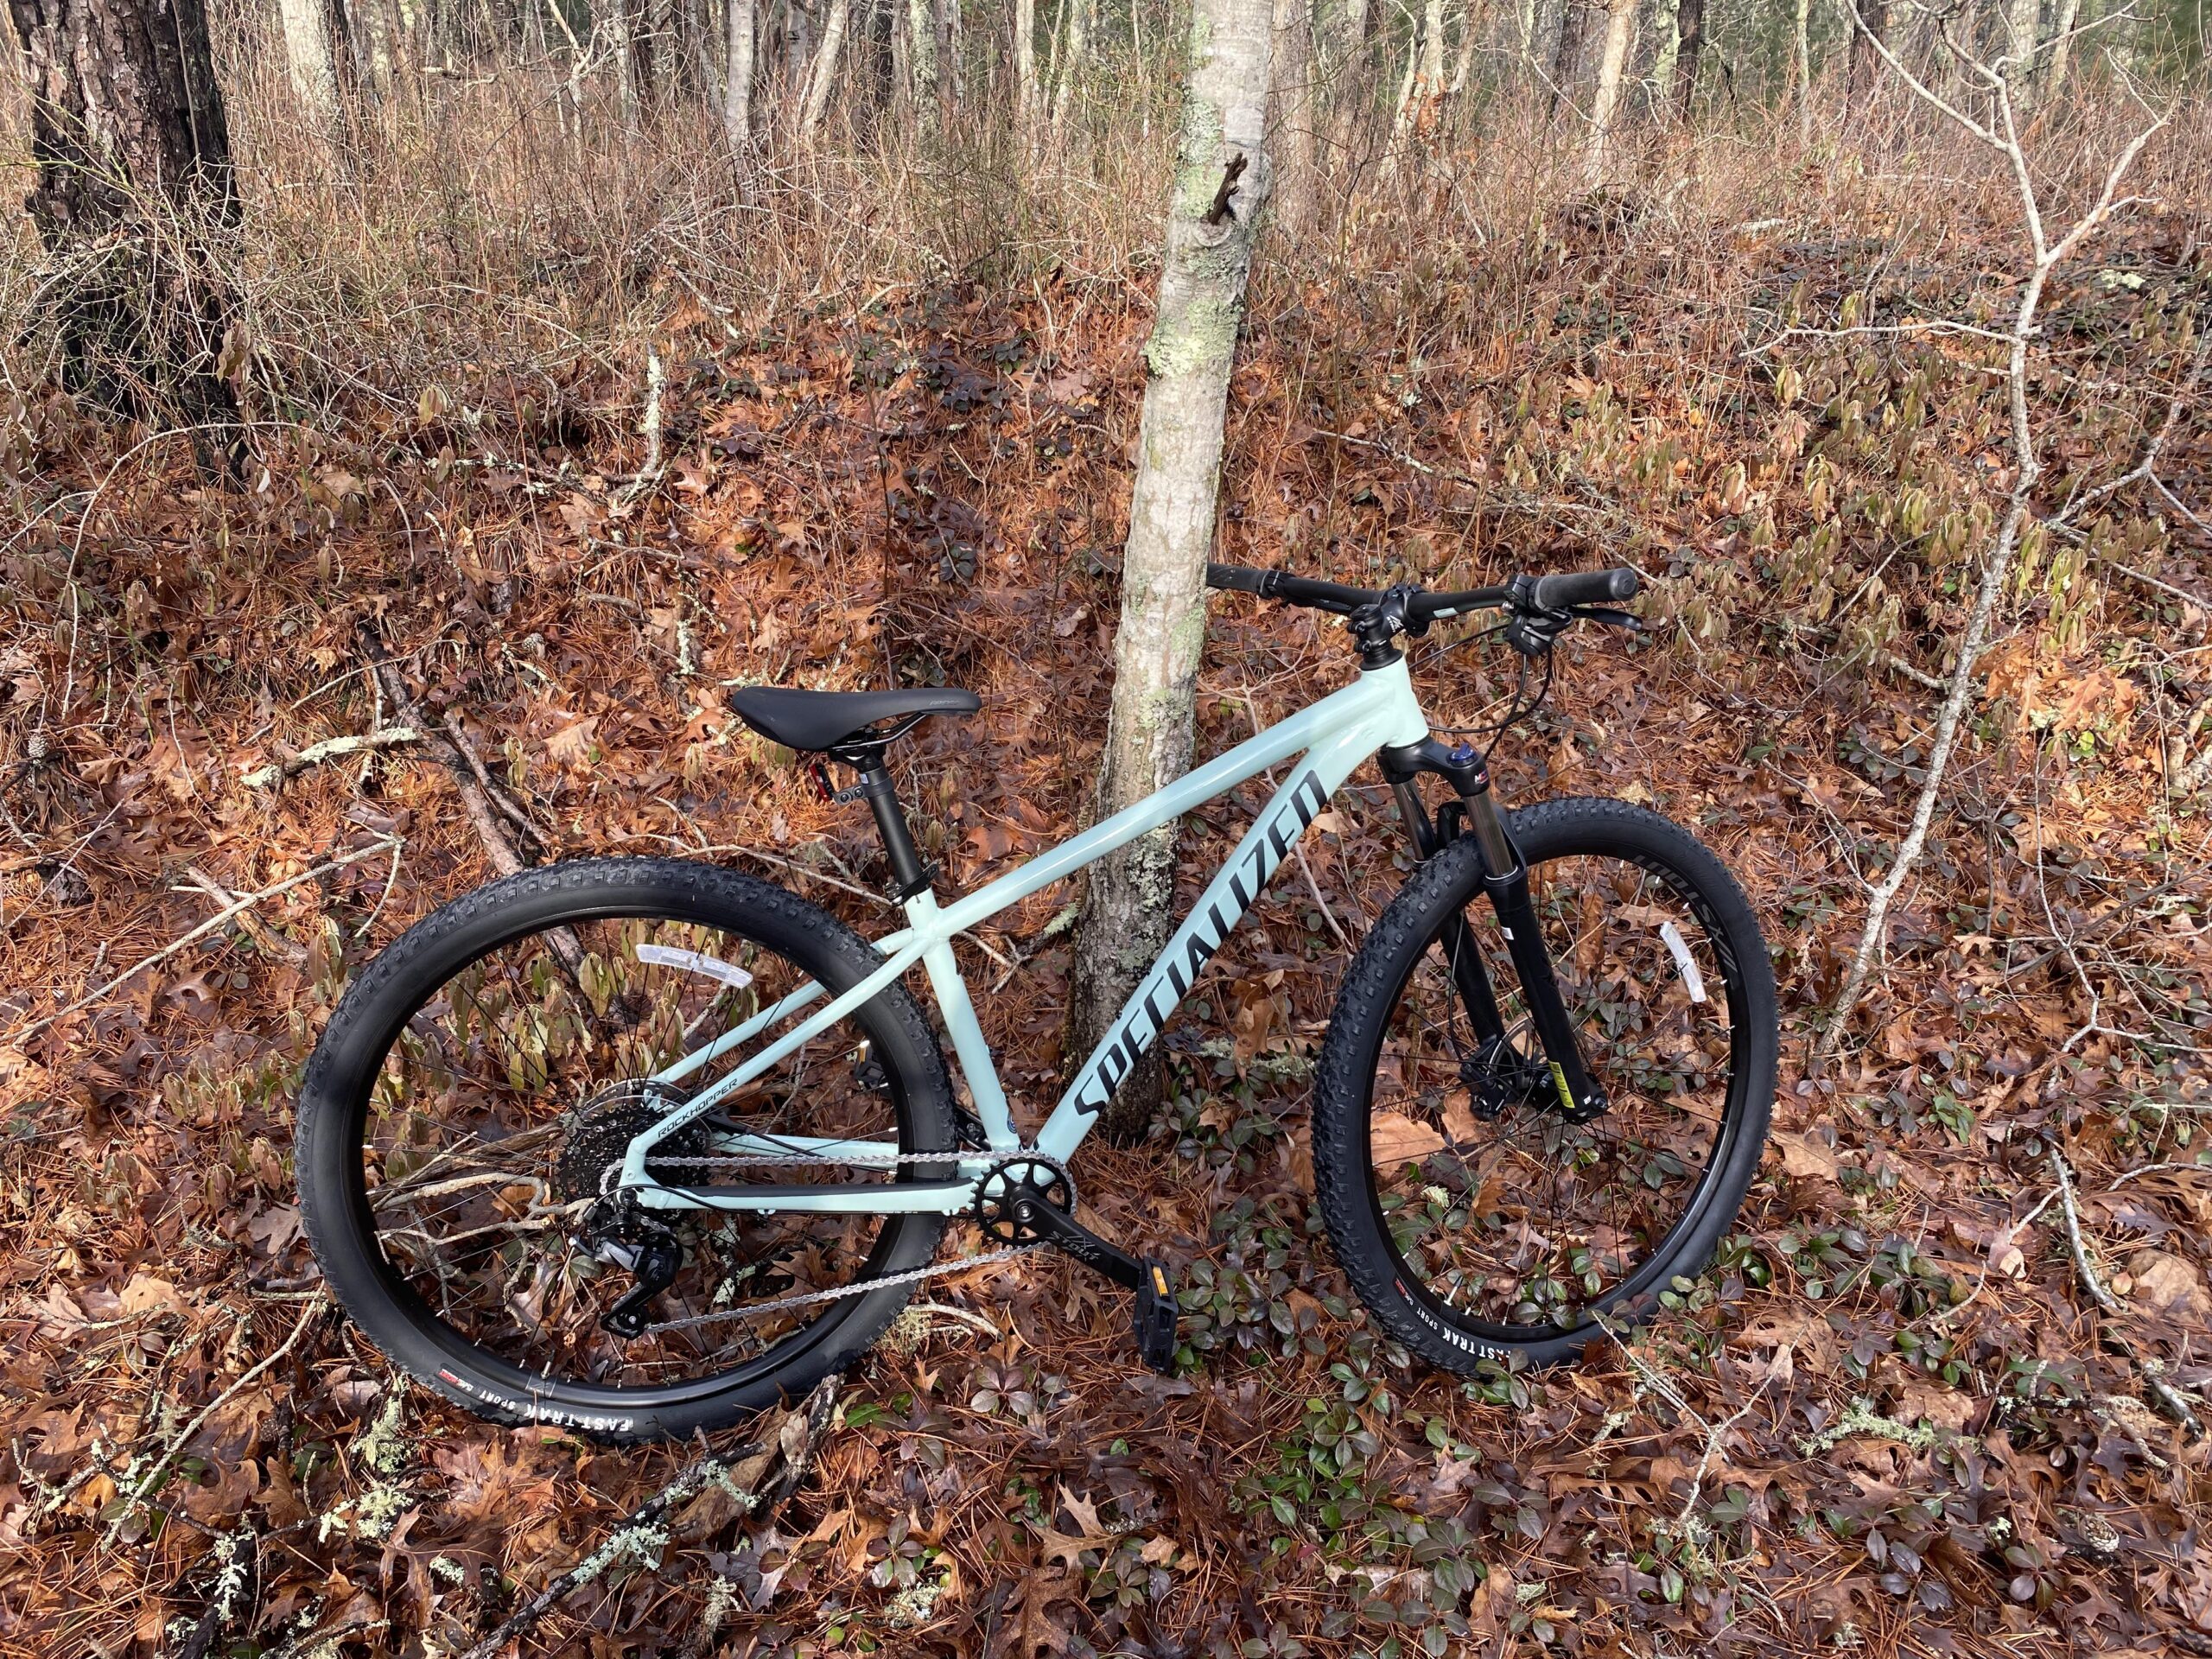 Brand new to mountain biking. Loving it and I have questions and would appreciate any tips and advice : mountainbiking